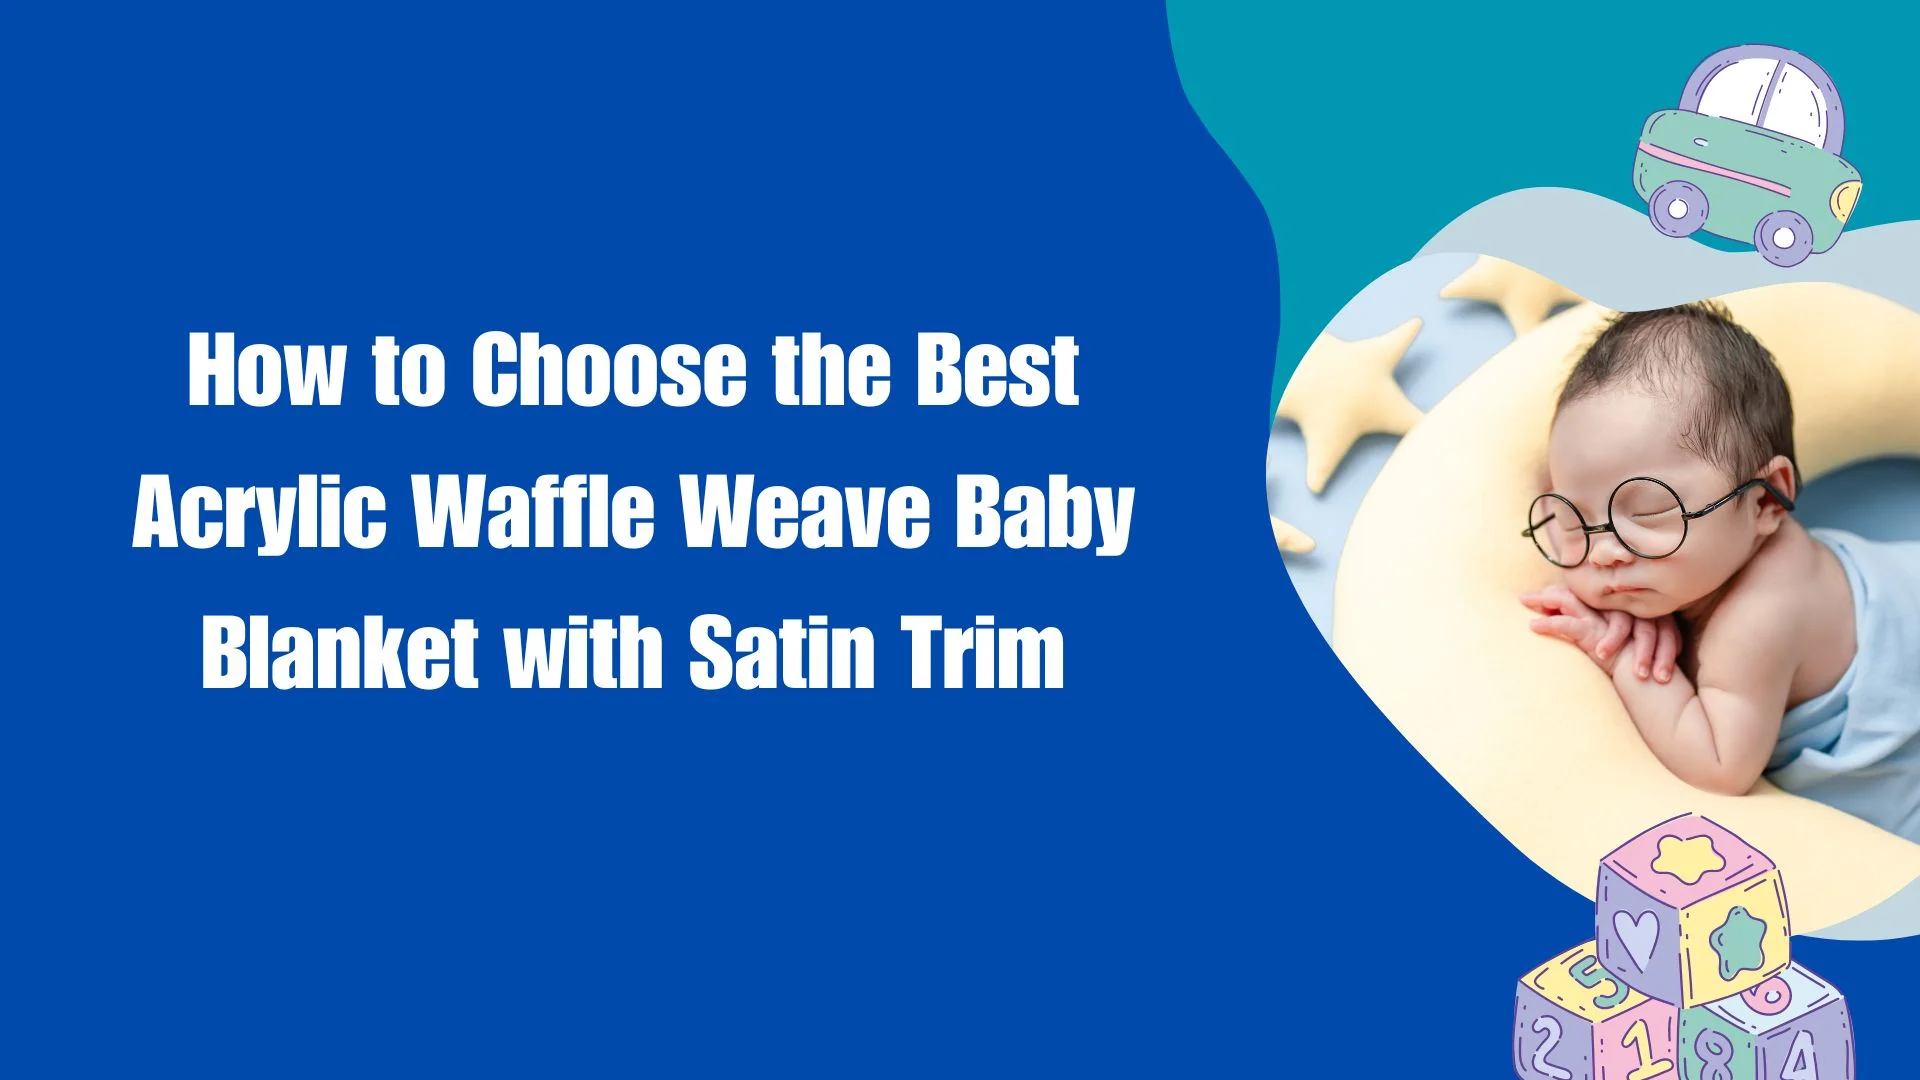 How to choose the best acrylic waffle weave baby blanket